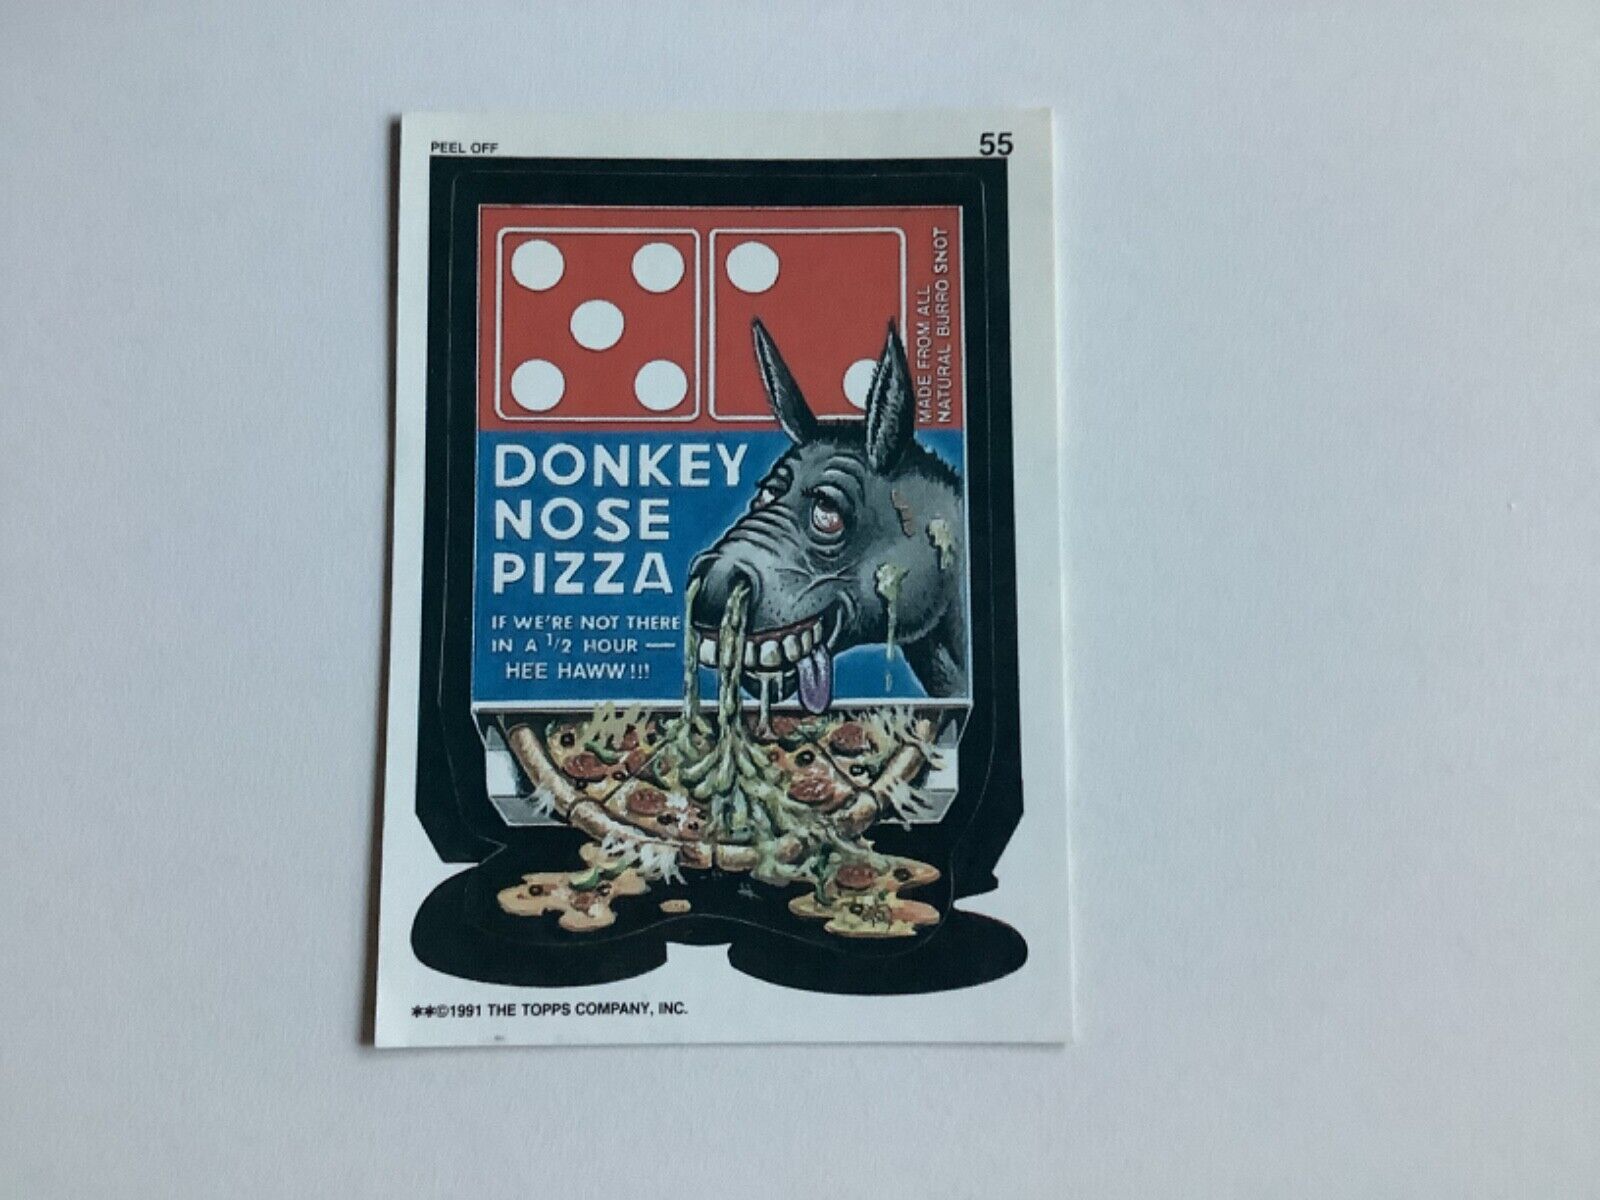 DOMINOES PIZZA 1991 TOPPS WACKY PACKAGES CARD PARODY, DONKEY NOSE 55 NM VINTAGE 